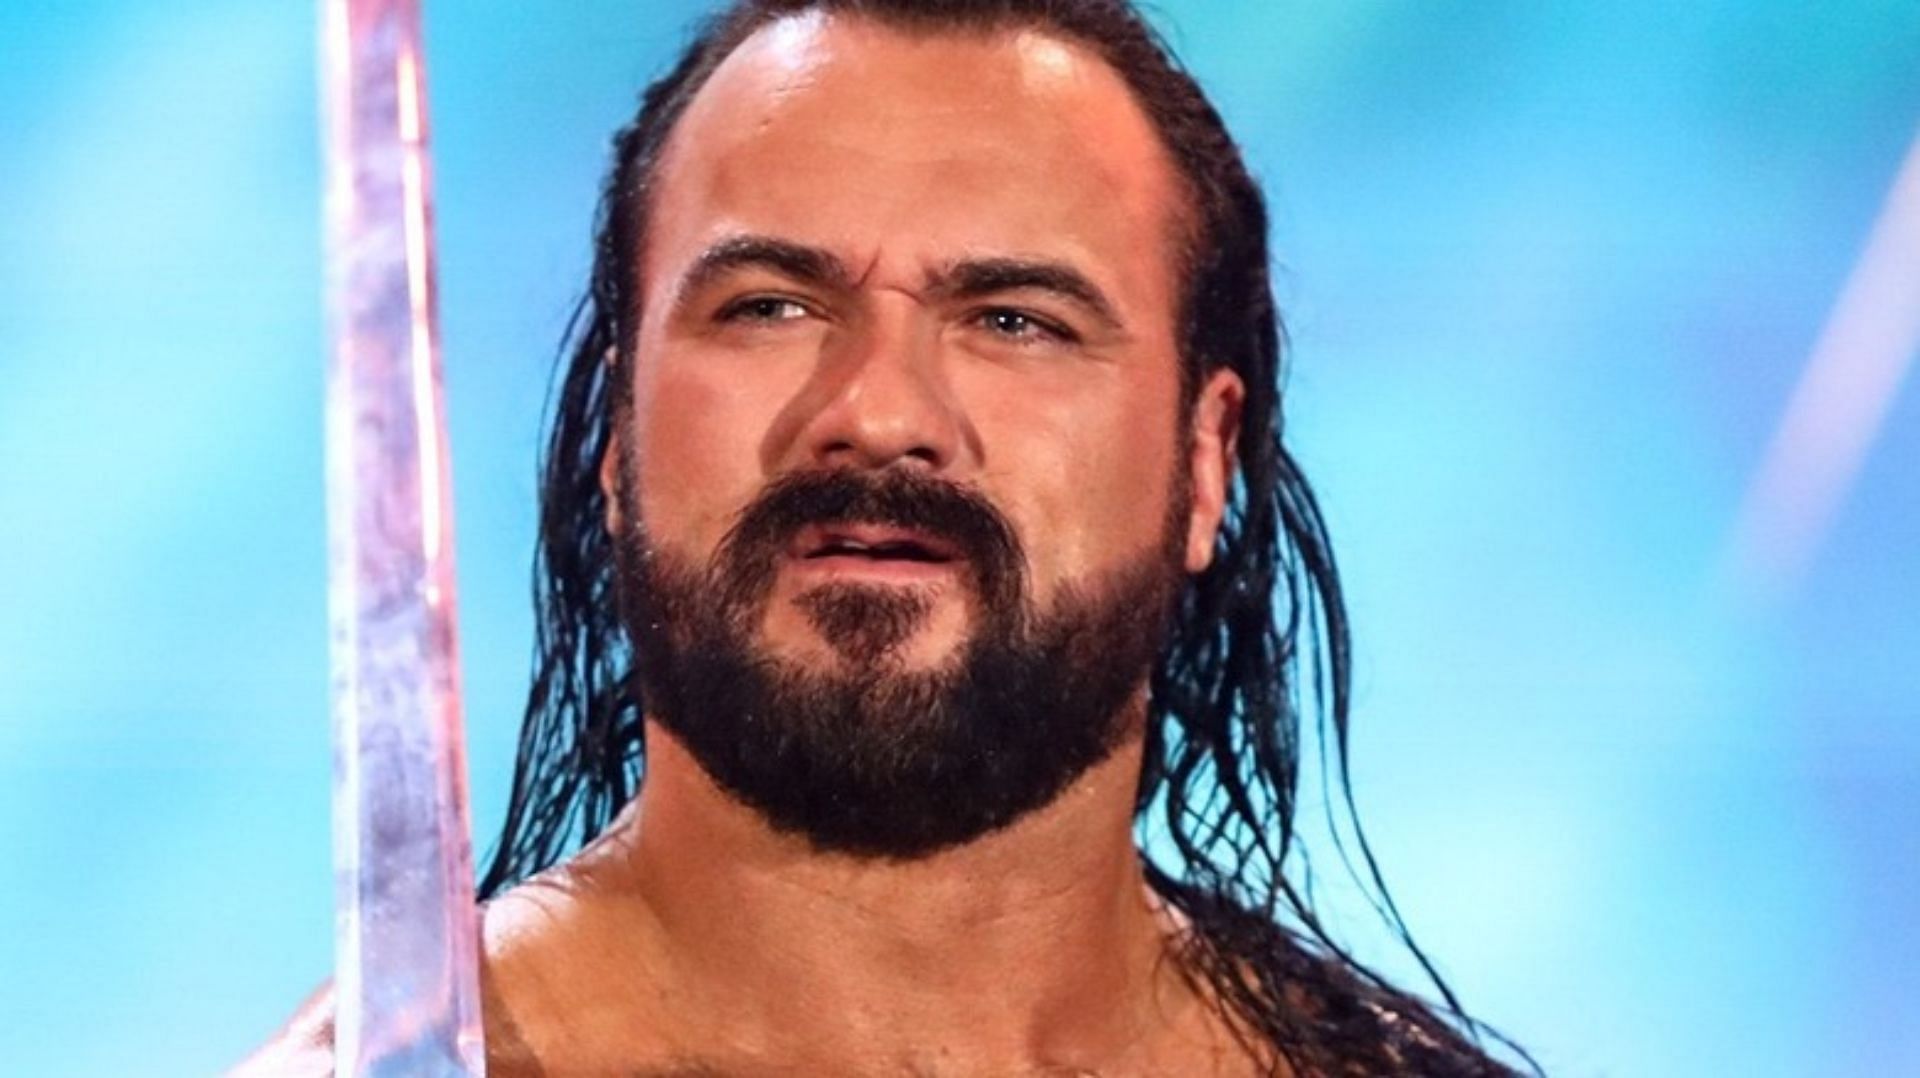 Drew McIntyre is a two-time WWE Champion